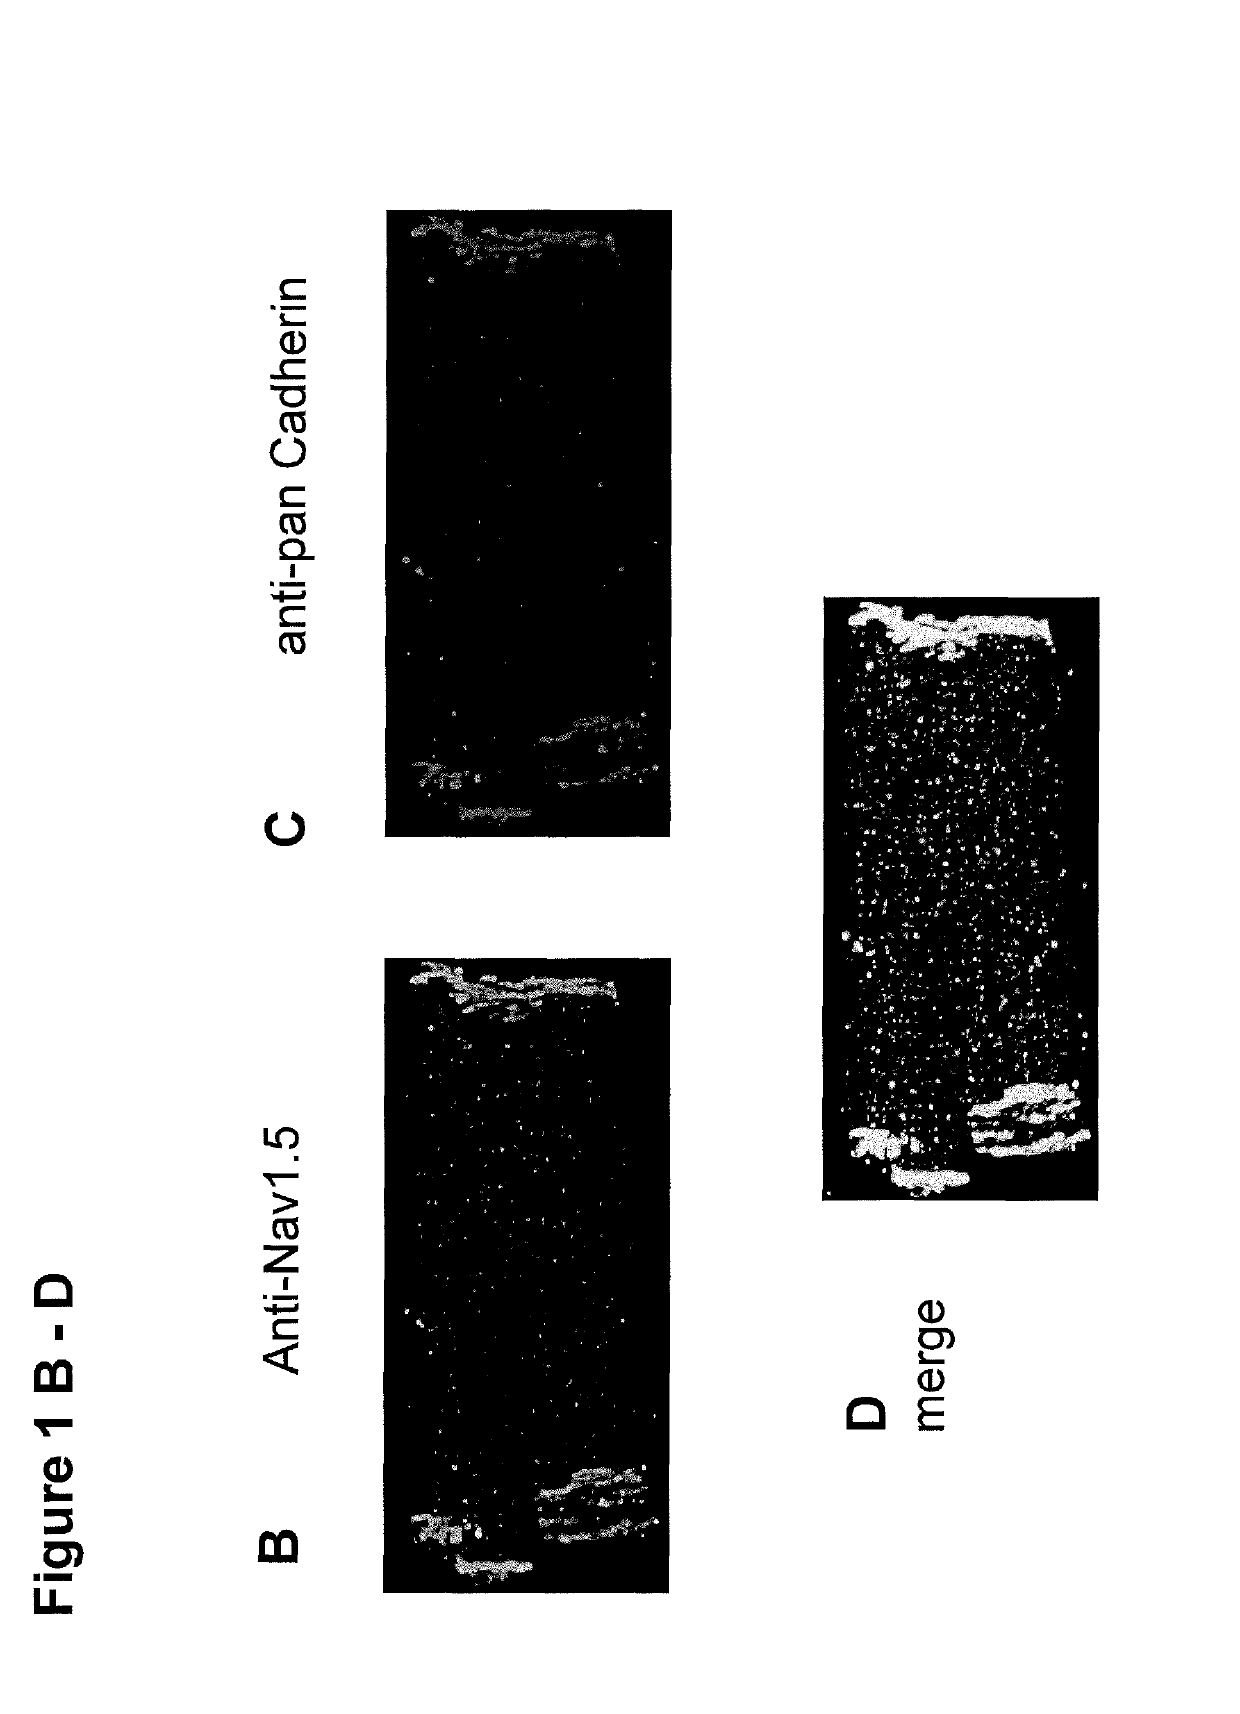 Method and kit for assessment of sodium channel-related anti- or pro-arrhythmic potential of compounds